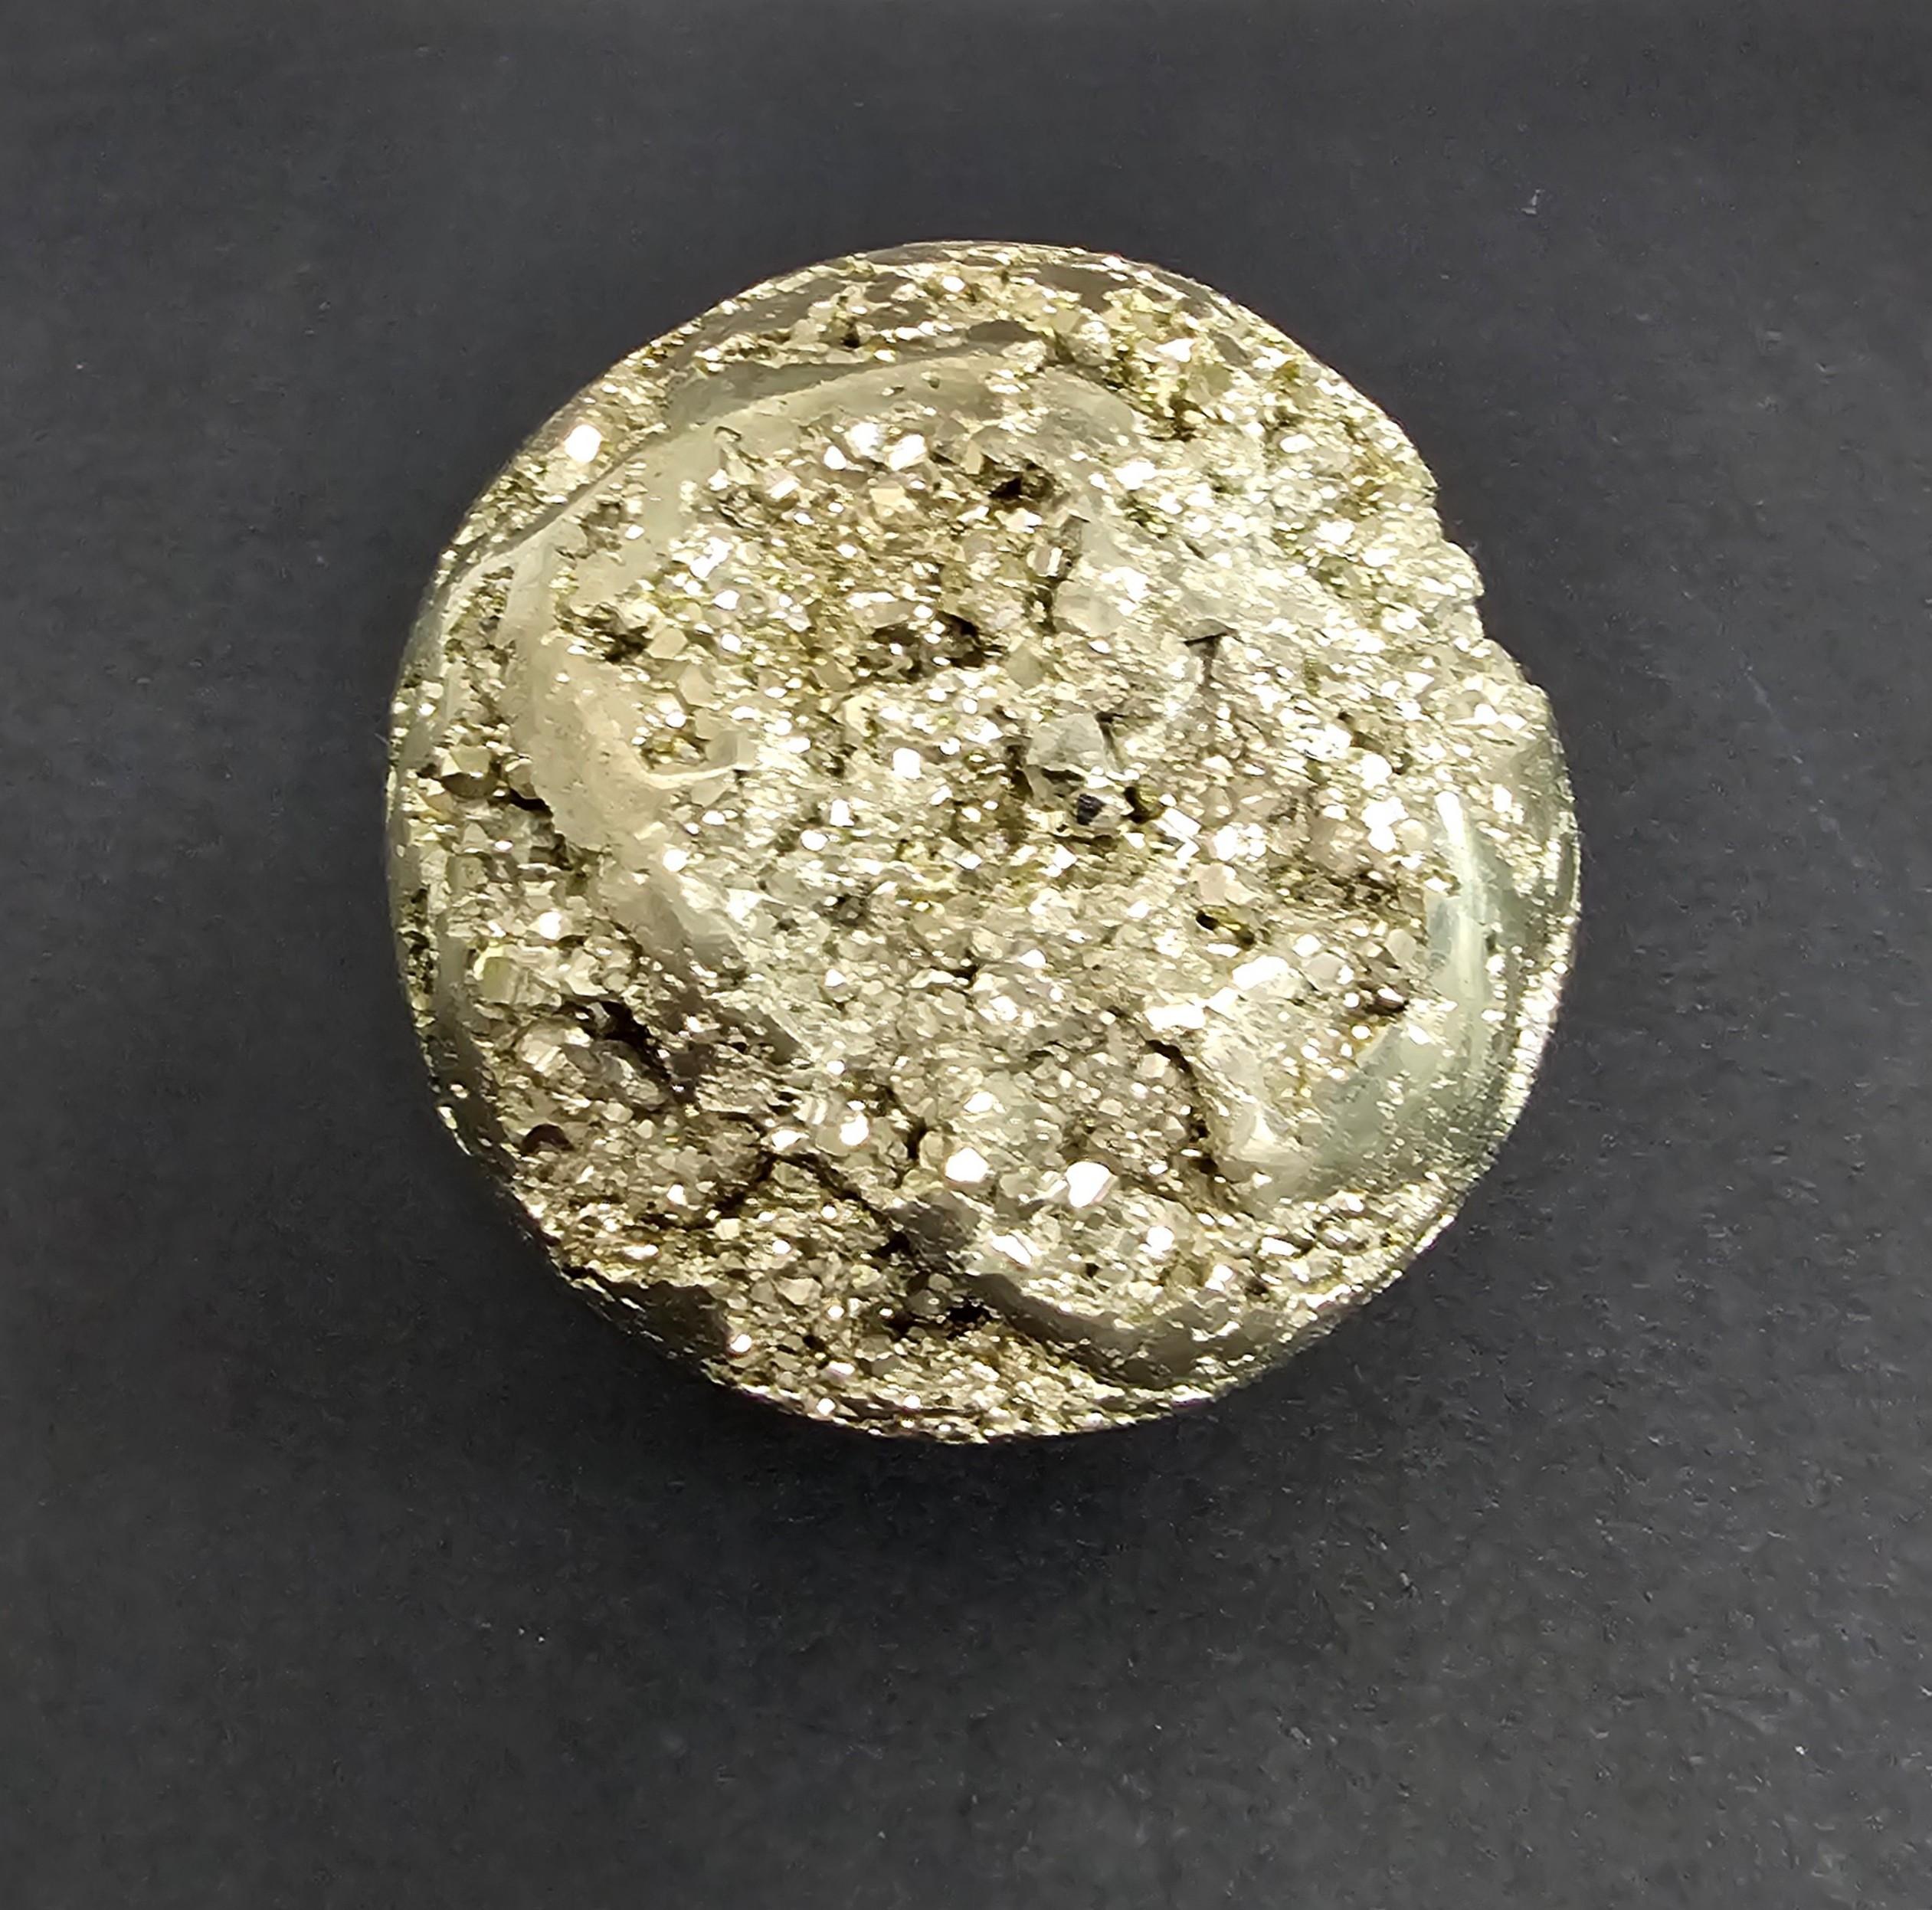 A visually striking Peruvian Pyrite sphere! Fairly large and heavy, this massive sphere of brillant metallic Pyrite is a study in duality, with a large section of the exterior surface polished smooth and round, while the resplendent cavities are